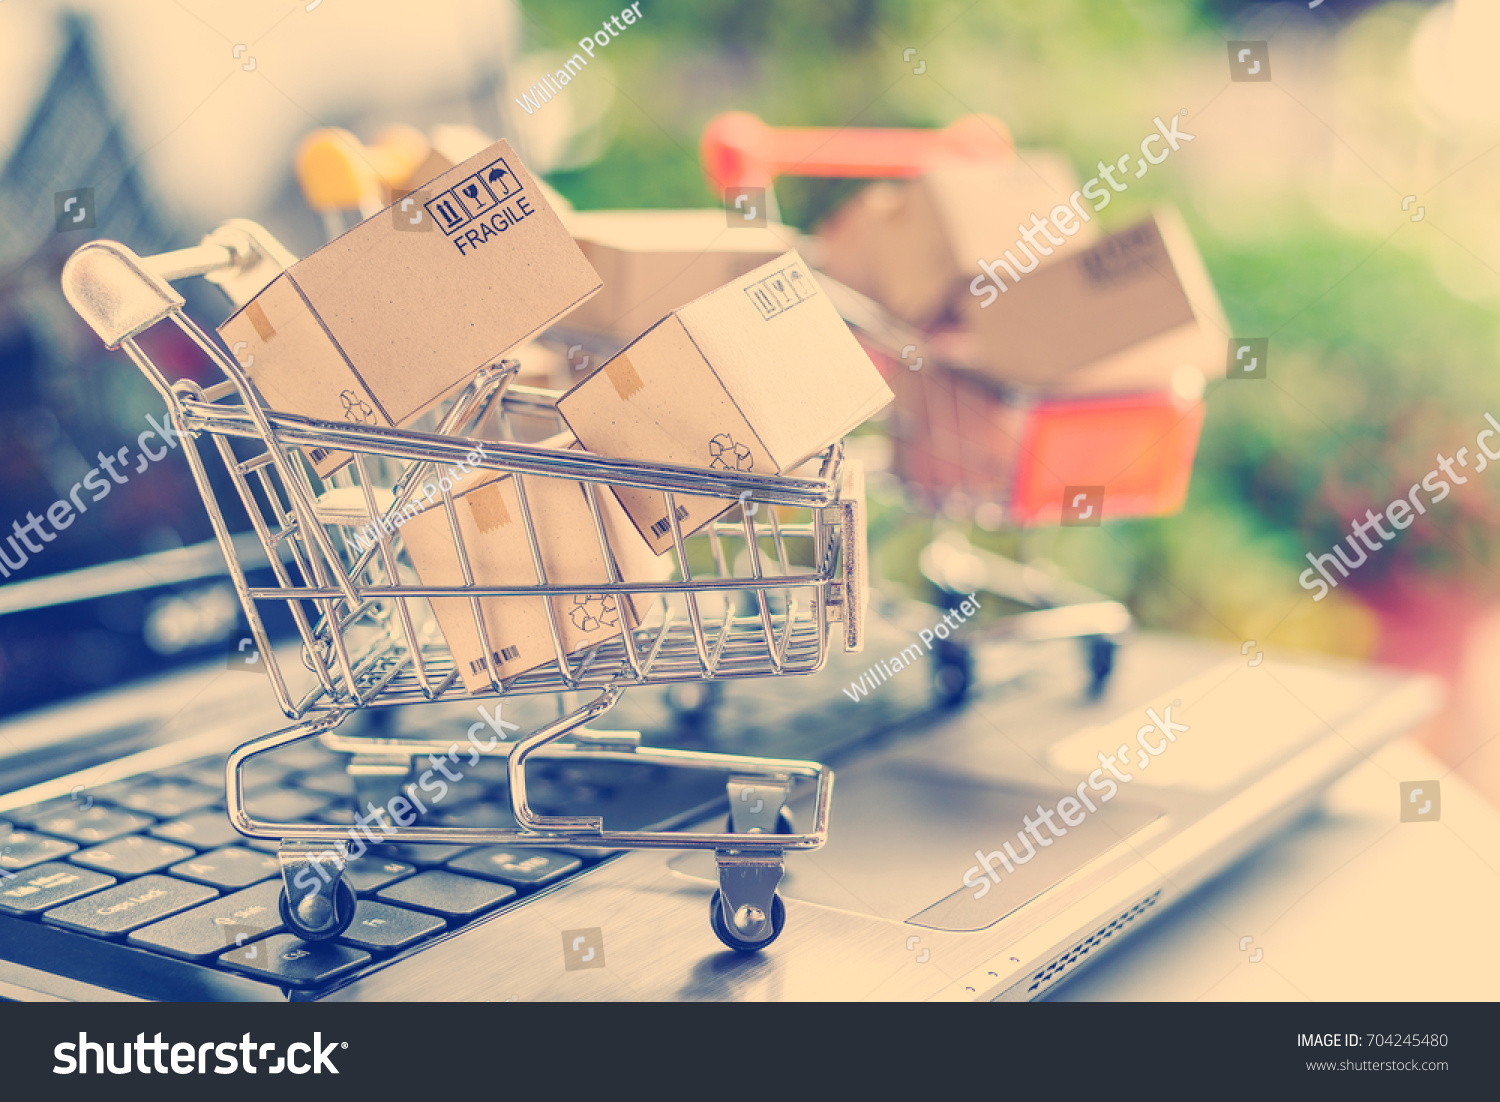 Freight or shipping service for online shopping or ecommerce concept : Paper boxes or cartons in metal shopping cart on a computer laptop keyboard. Customer always buy things via internet worldwide. #704245480